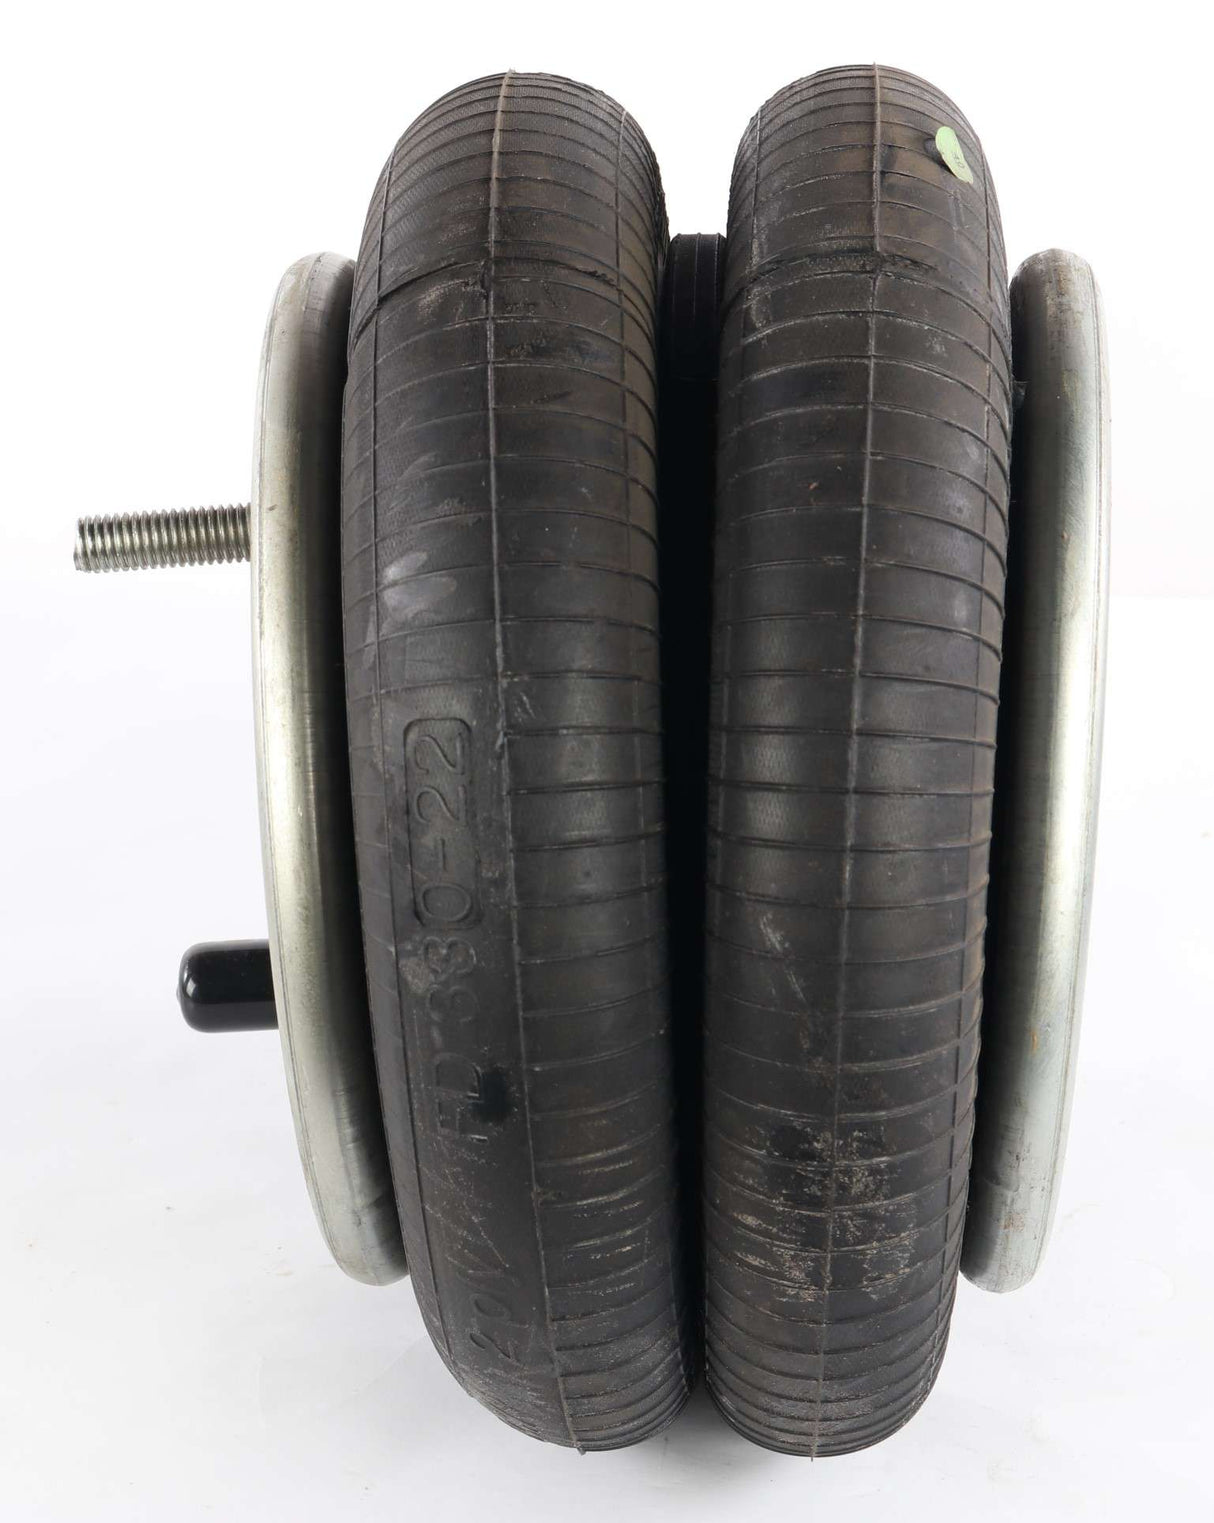 CONTINENTAL AG - CONTITECH/ELITE/GOODYEAR/ROULUNDS ­-­ 64268 ­-­ AIR SPRING FD 330-22-331